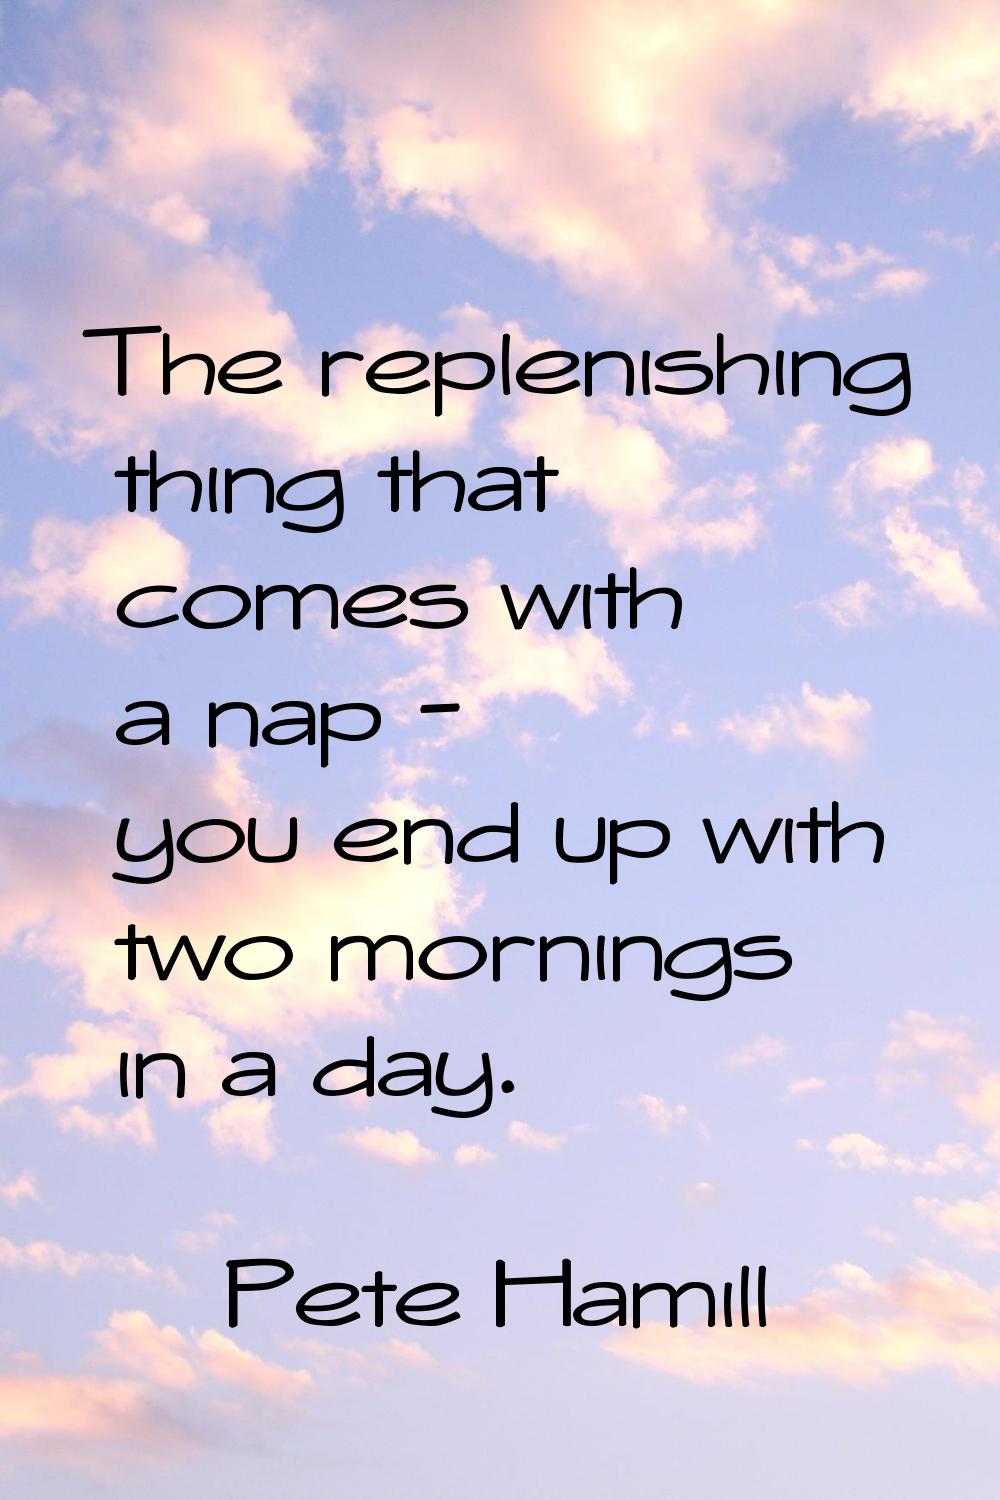 The replenishing thing that comes with a nap - you end up with two mornings in a day.